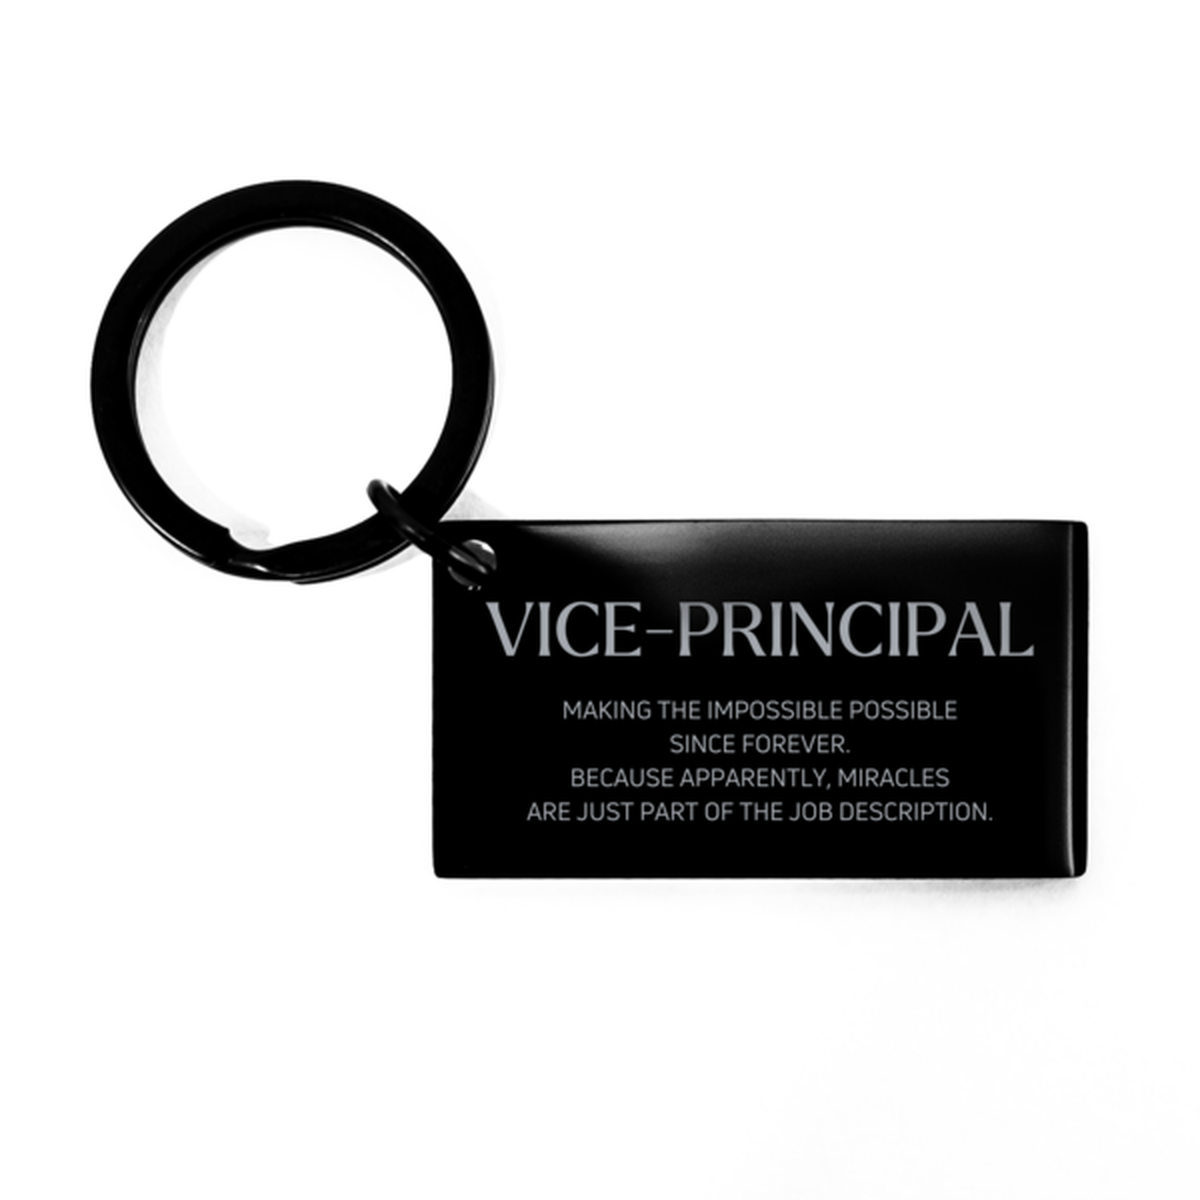 Funny Vice-principal Gifts, Miracles are just part of the job description, Inspirational Birthday Keychain For Vice-principal, Men, Women, Coworkers, Friends, Boss